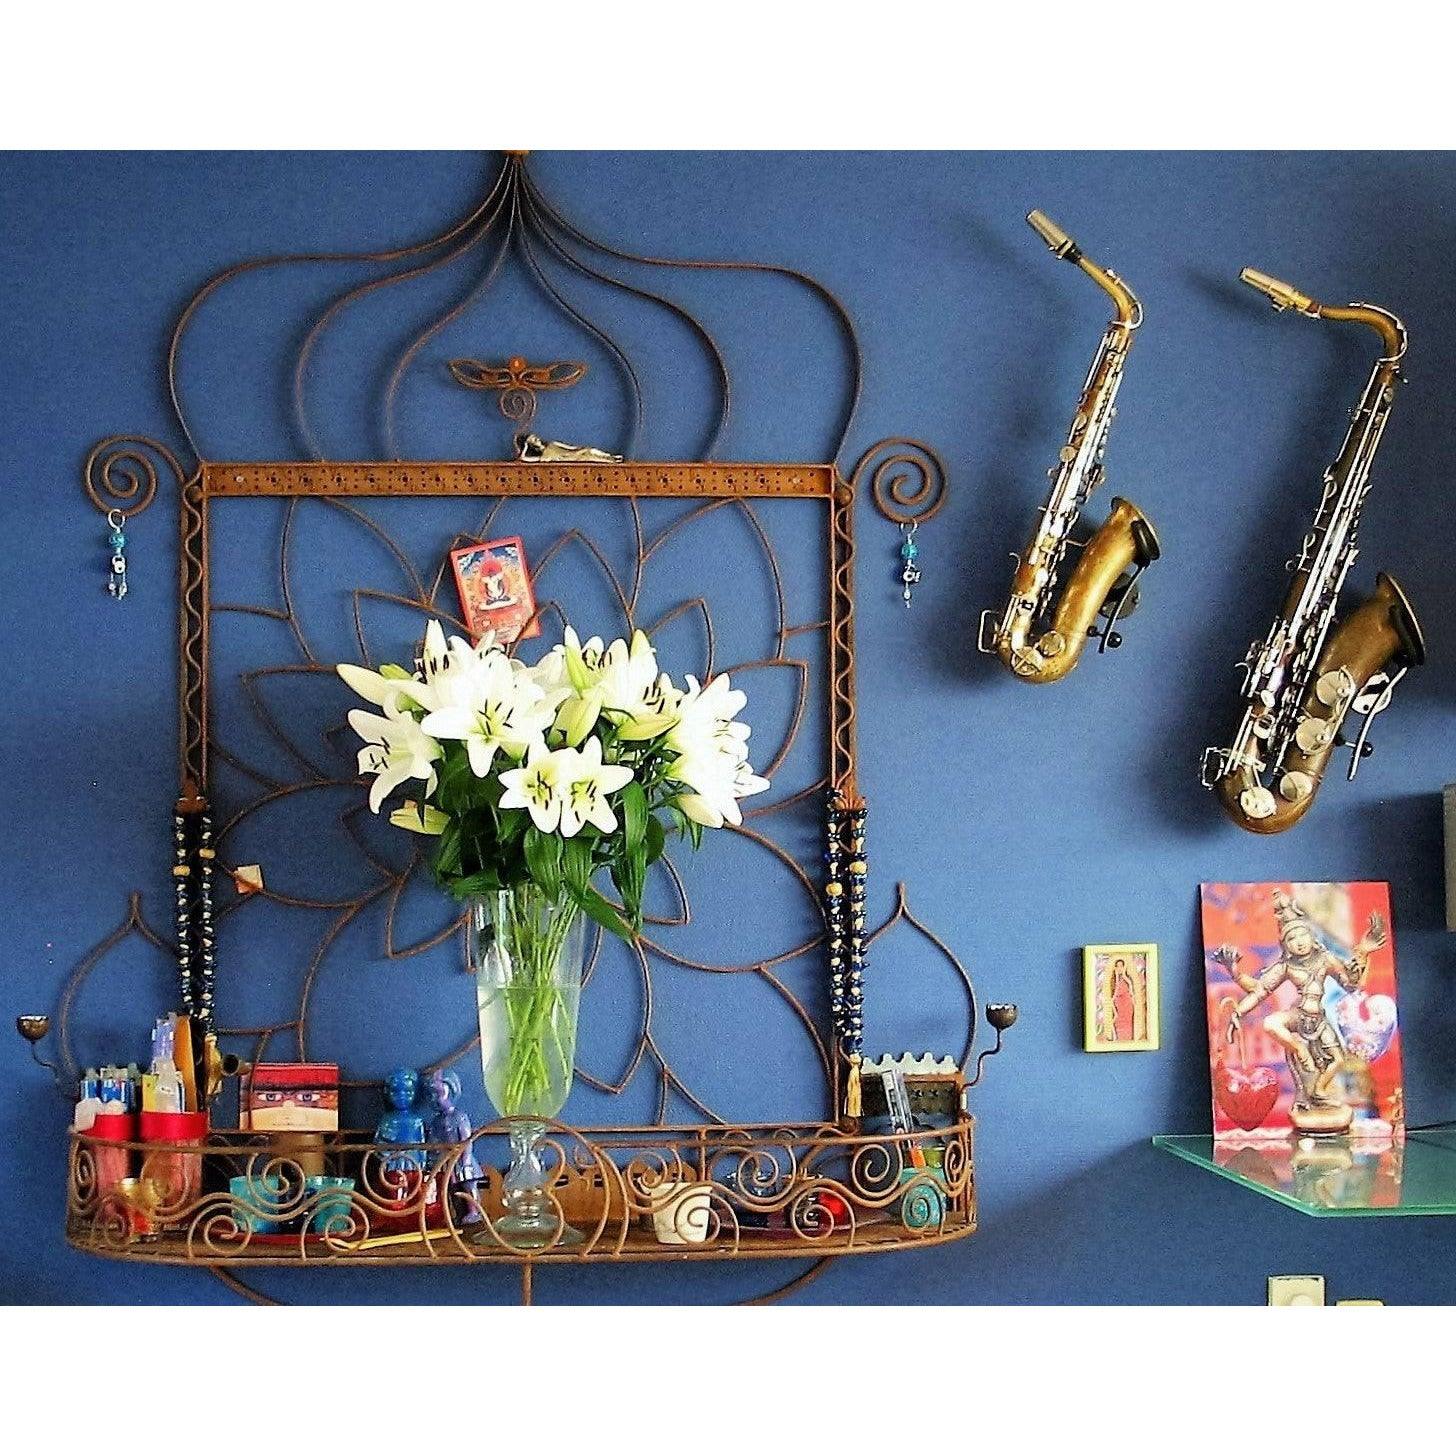 Blue wall with eclectic art object  and set of saxophones in Locoparasaxo saxophone stands